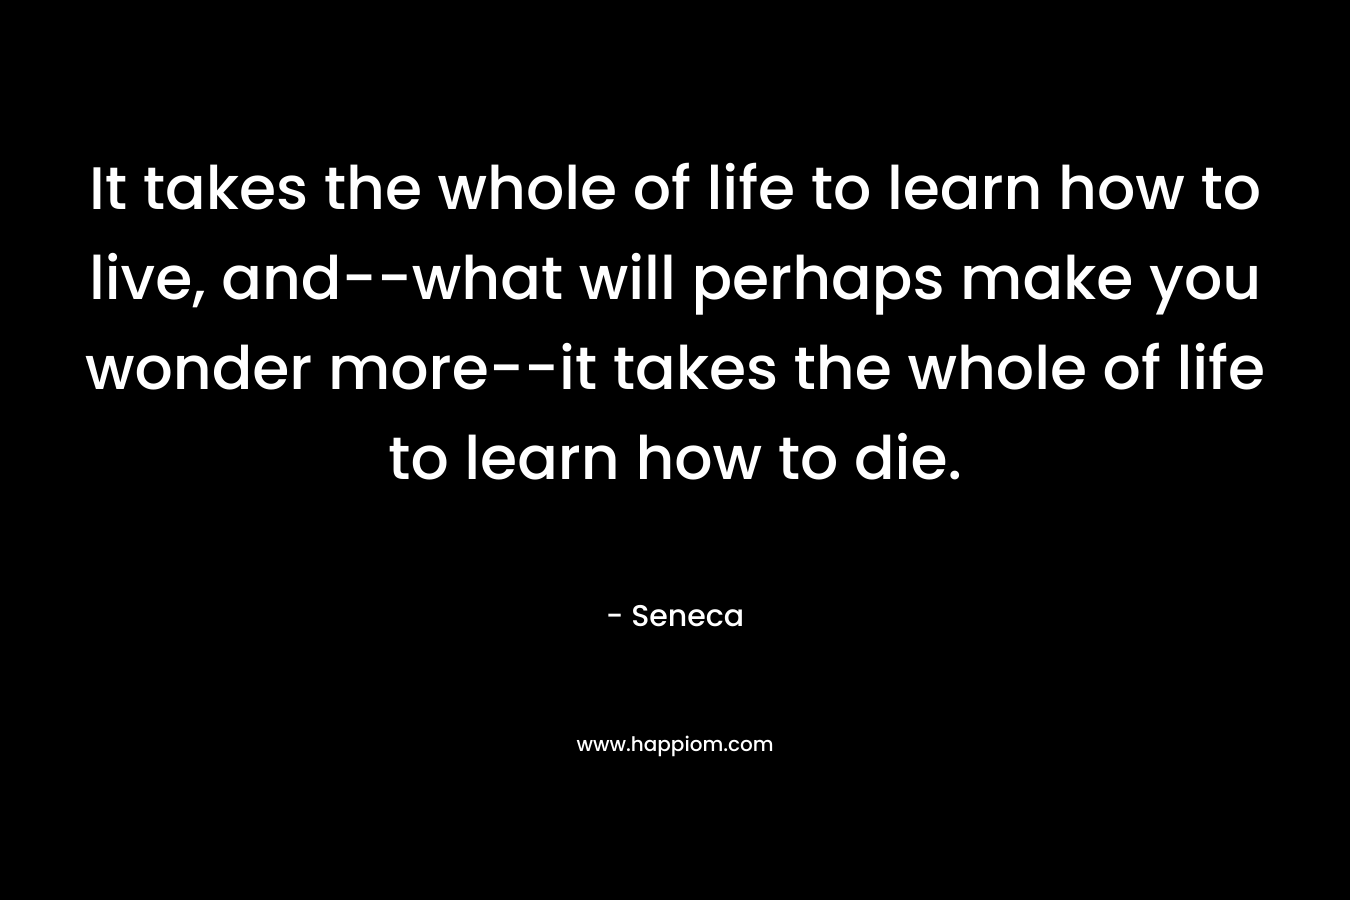 It takes the whole of life to learn how to live, and--what will perhaps make you wonder more--it takes the whole of life to learn how to die.